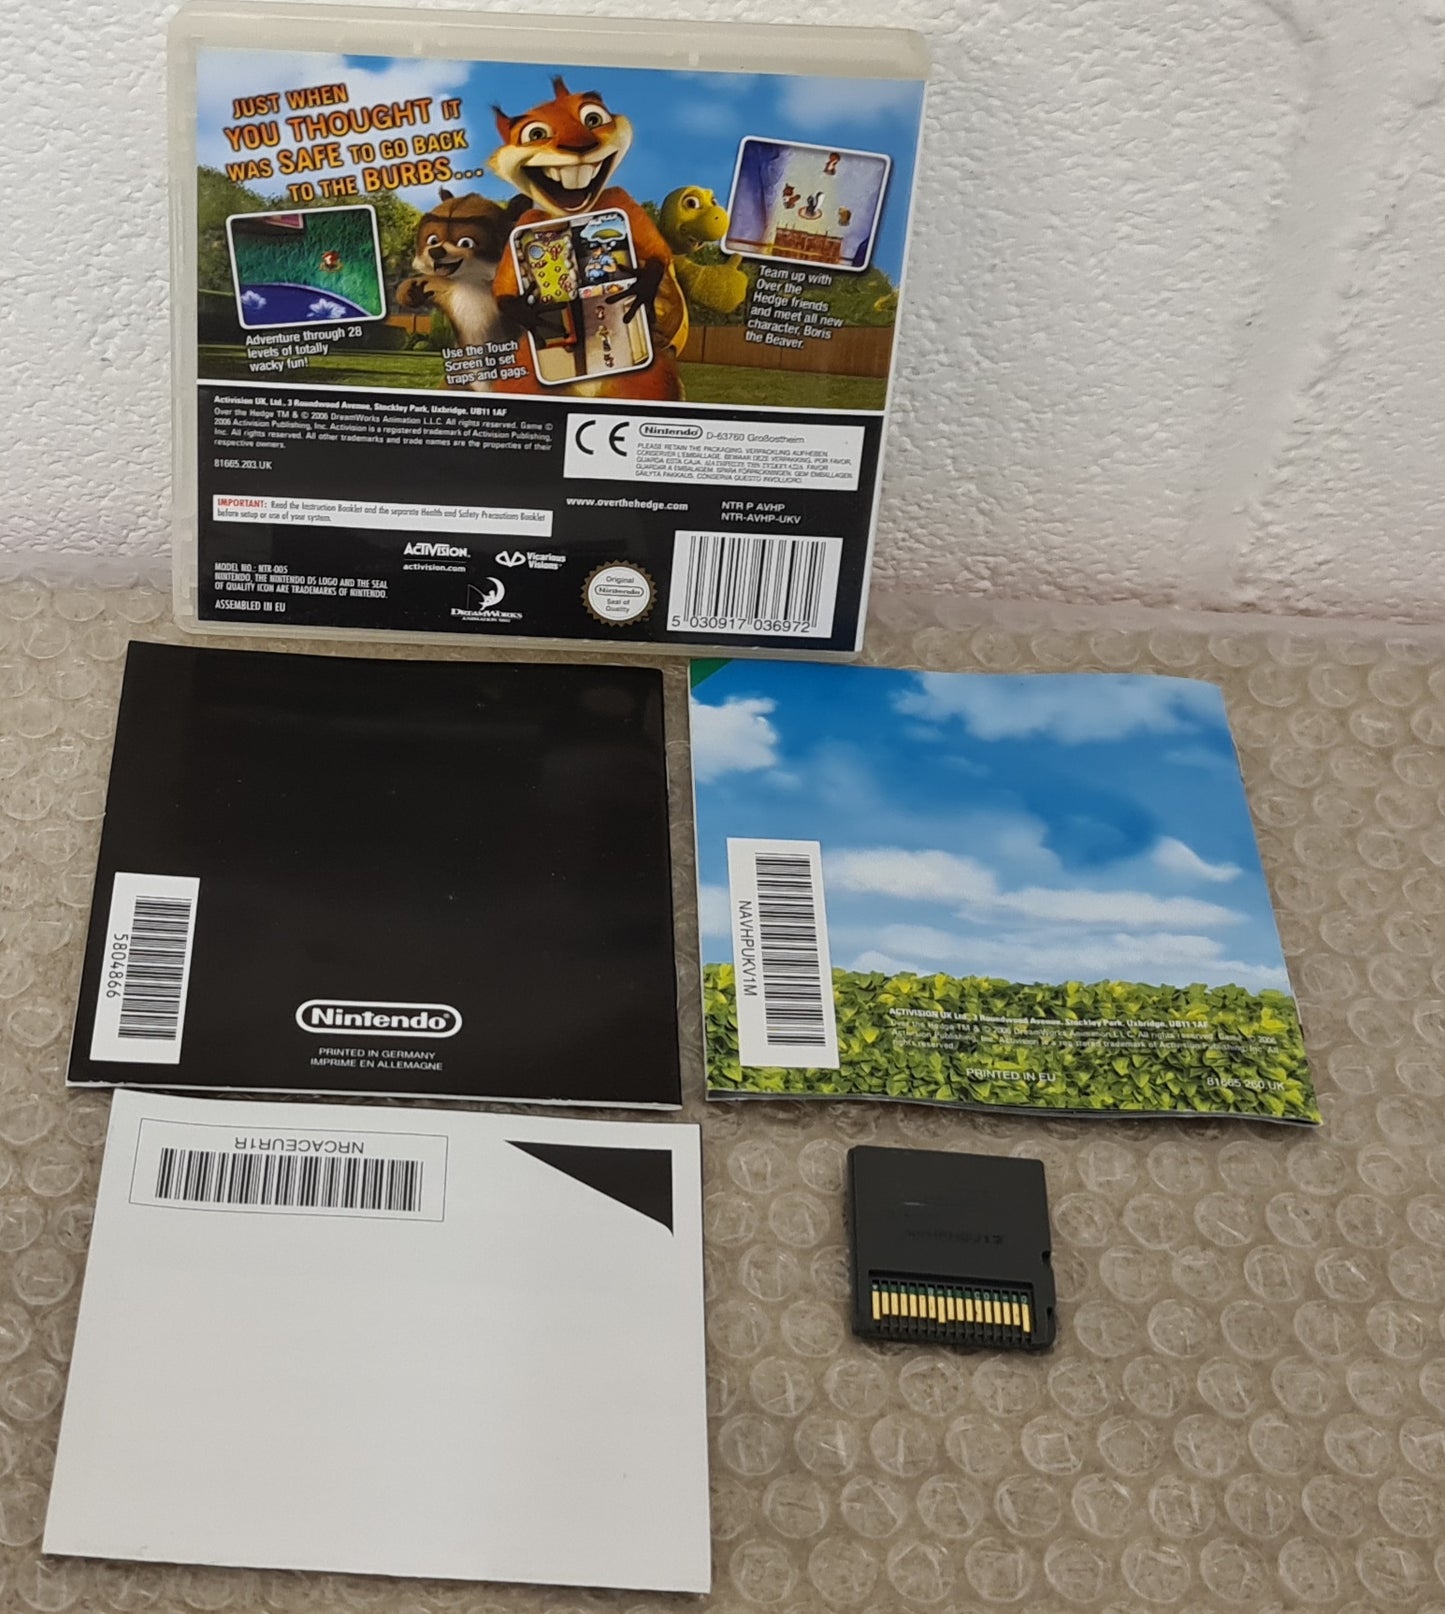 Over the Hedge Hammy Goes Nuts! Nintendo DS Game